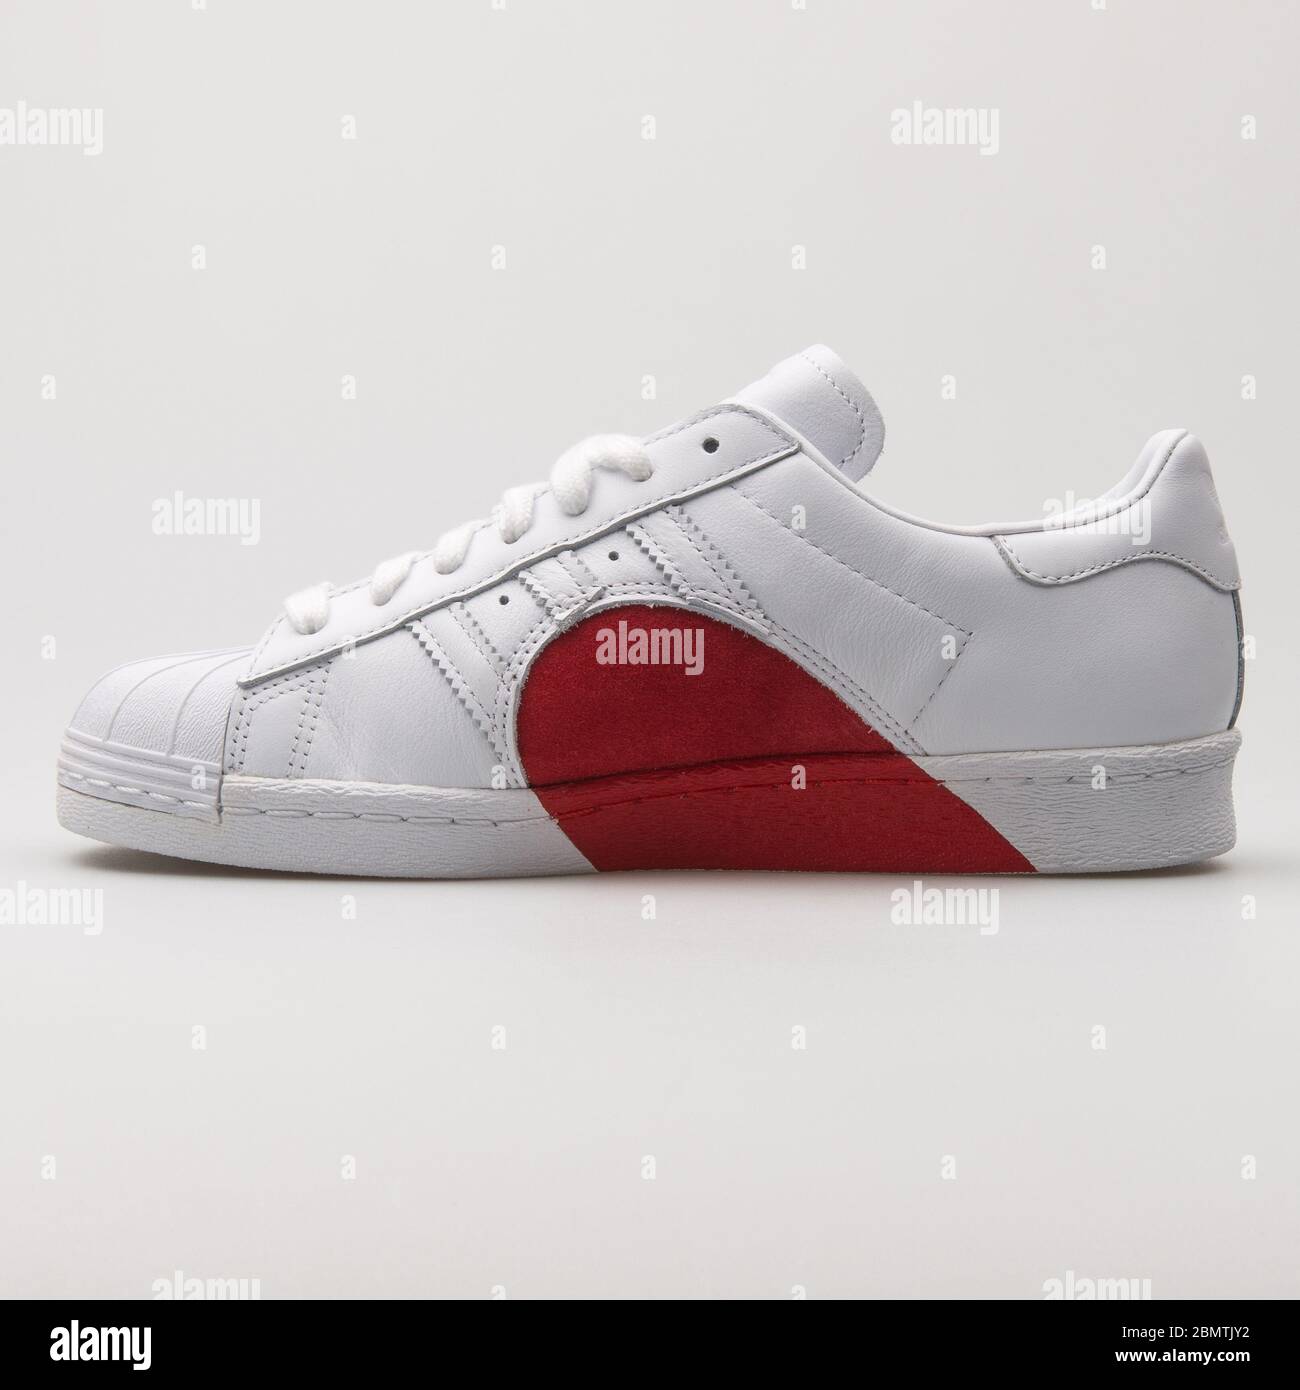 VIENNA, AUSTRIA - FEBRUARY 19, 2018: Adidas Superstar 80s HH white and red  sneaker on white background Stock Photo - Alamy